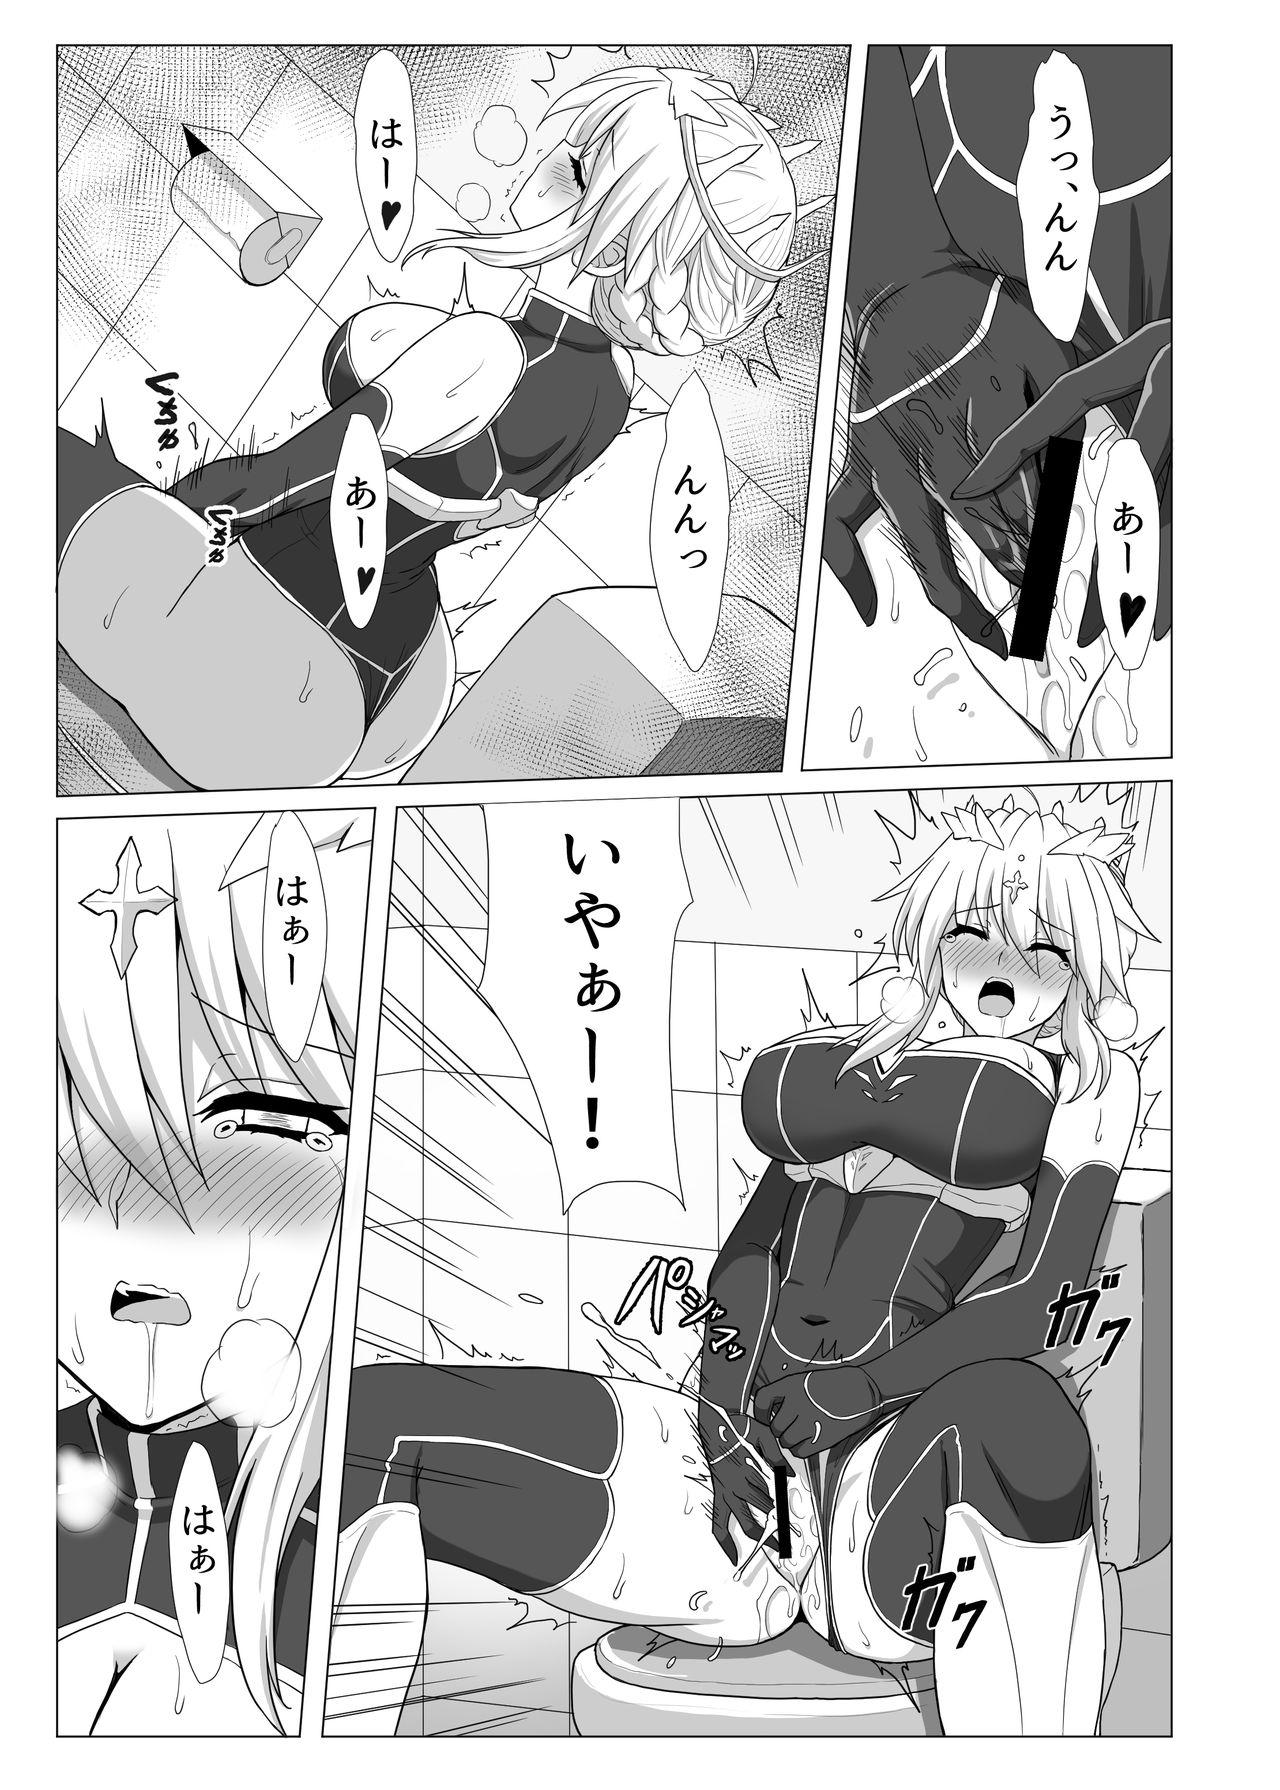 Leather Fate/NTR - Fate grand order Fate stay night Vietnamese - Page 12